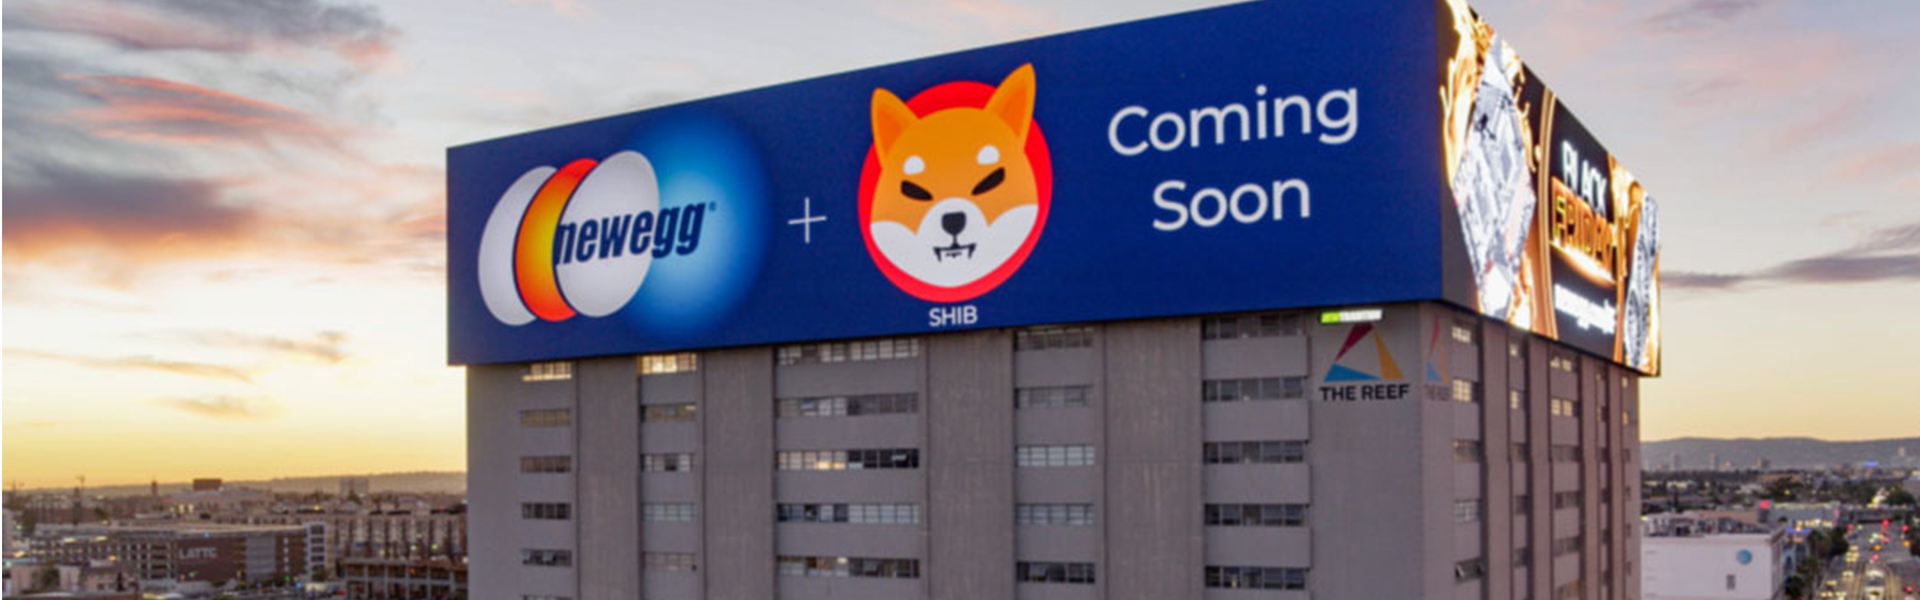 Newegg to Accept Shiba Inu (SHIB) Cryptocurrency as a Form of Payment on Newegg.com in Time for the Holidays